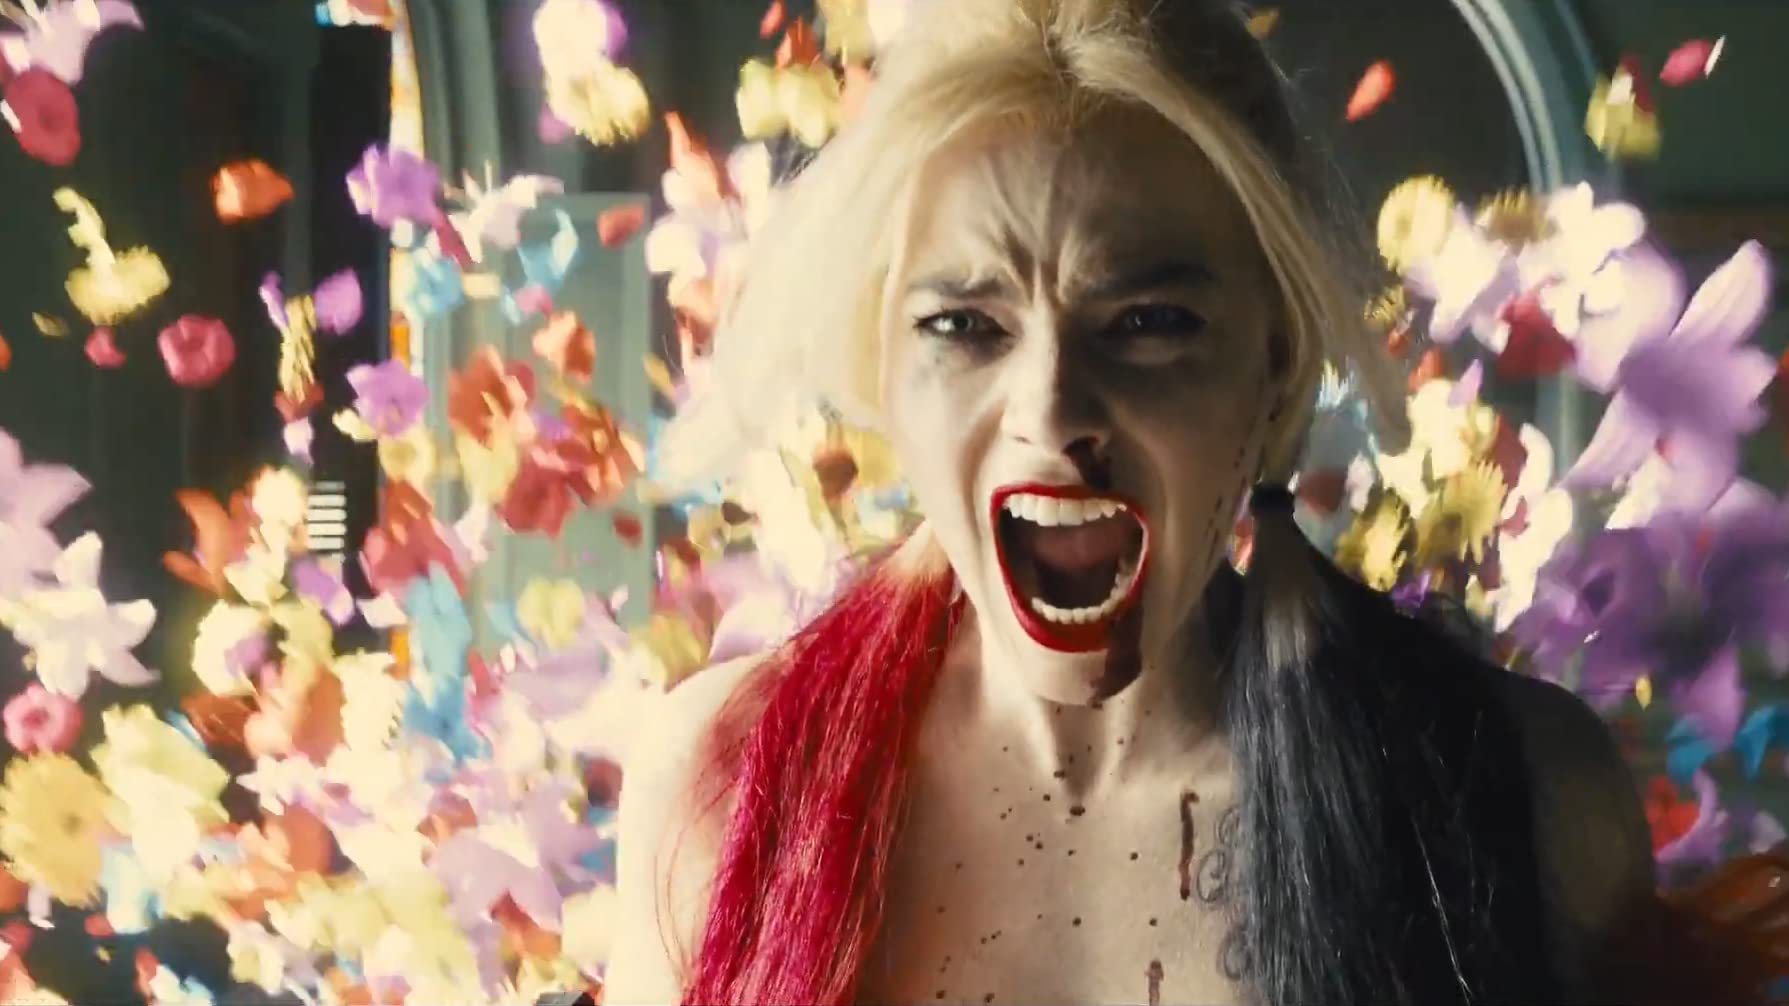 Watch: 'The Suicide Squad' makes a comeback